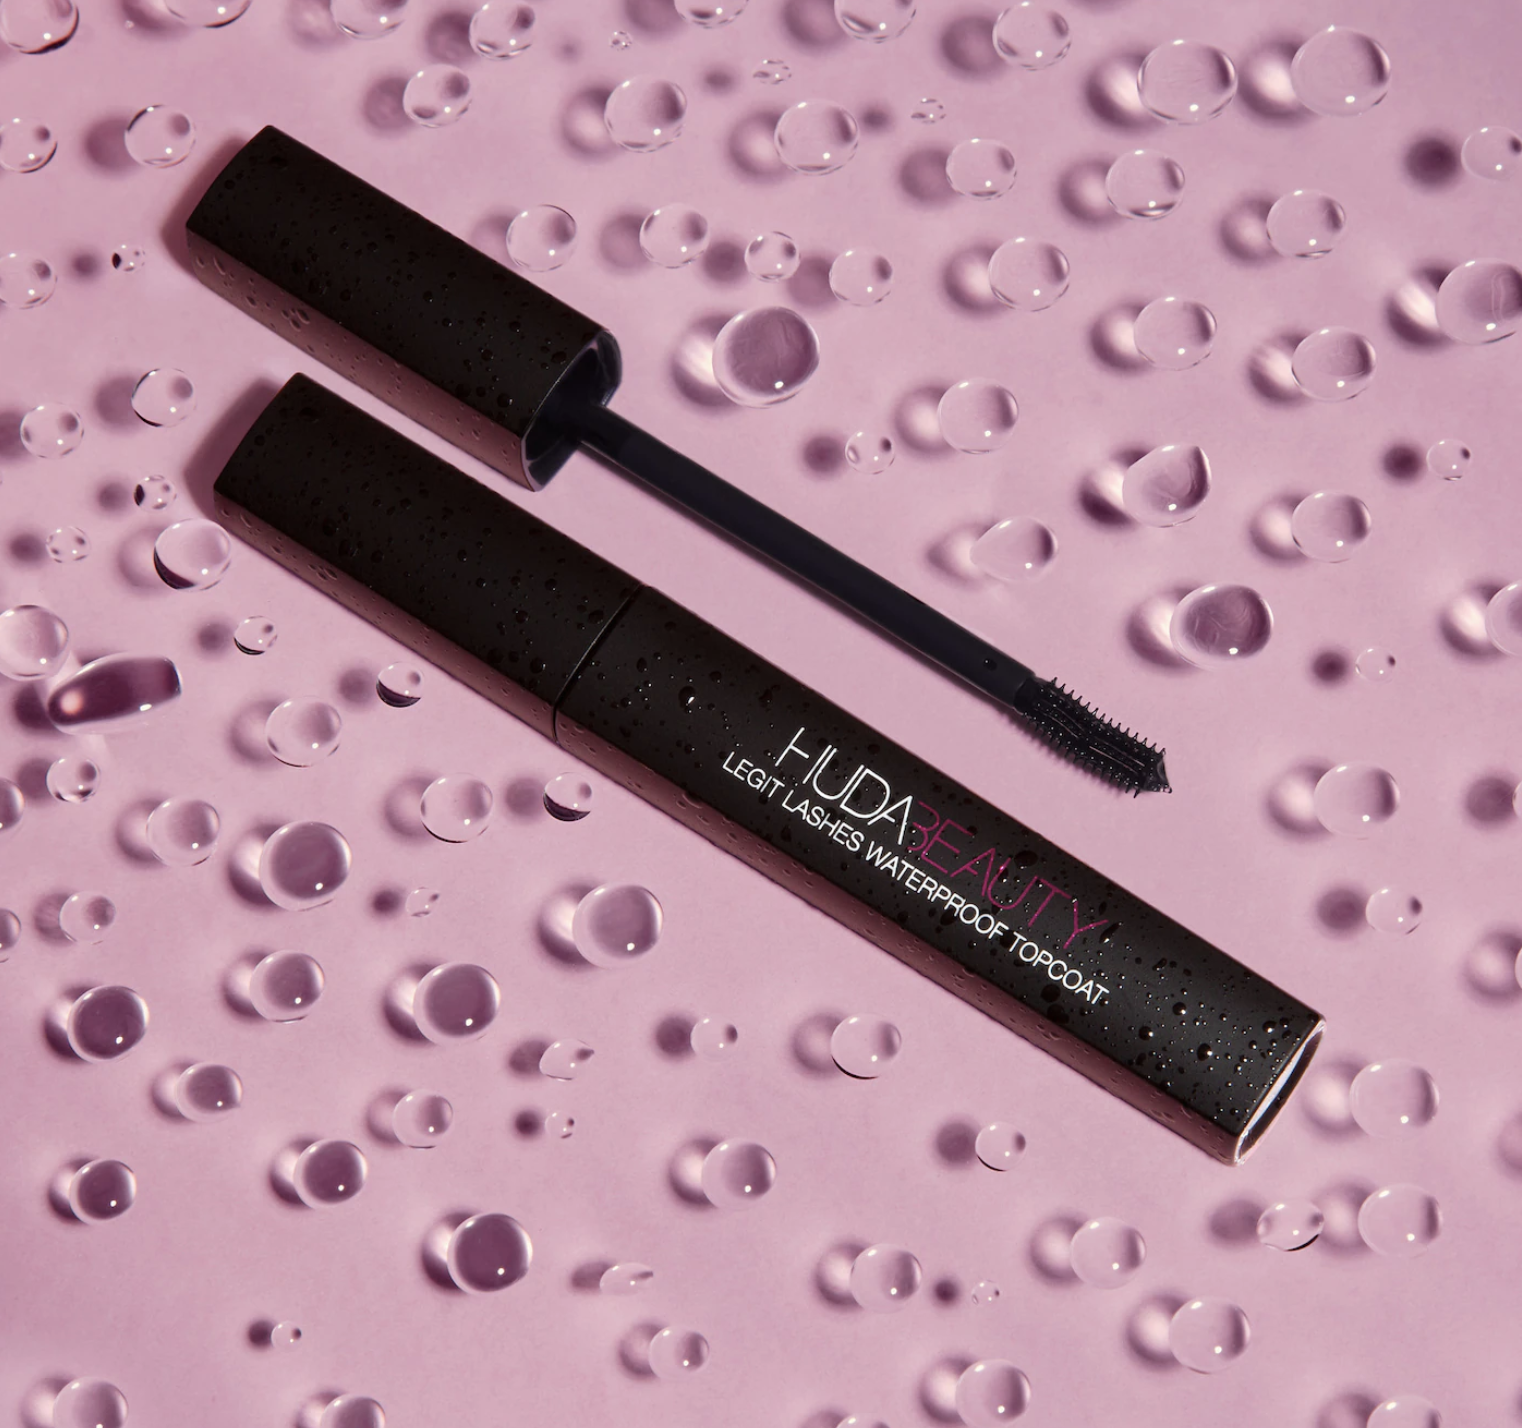 The mascara top coat surrounded by droplets of water